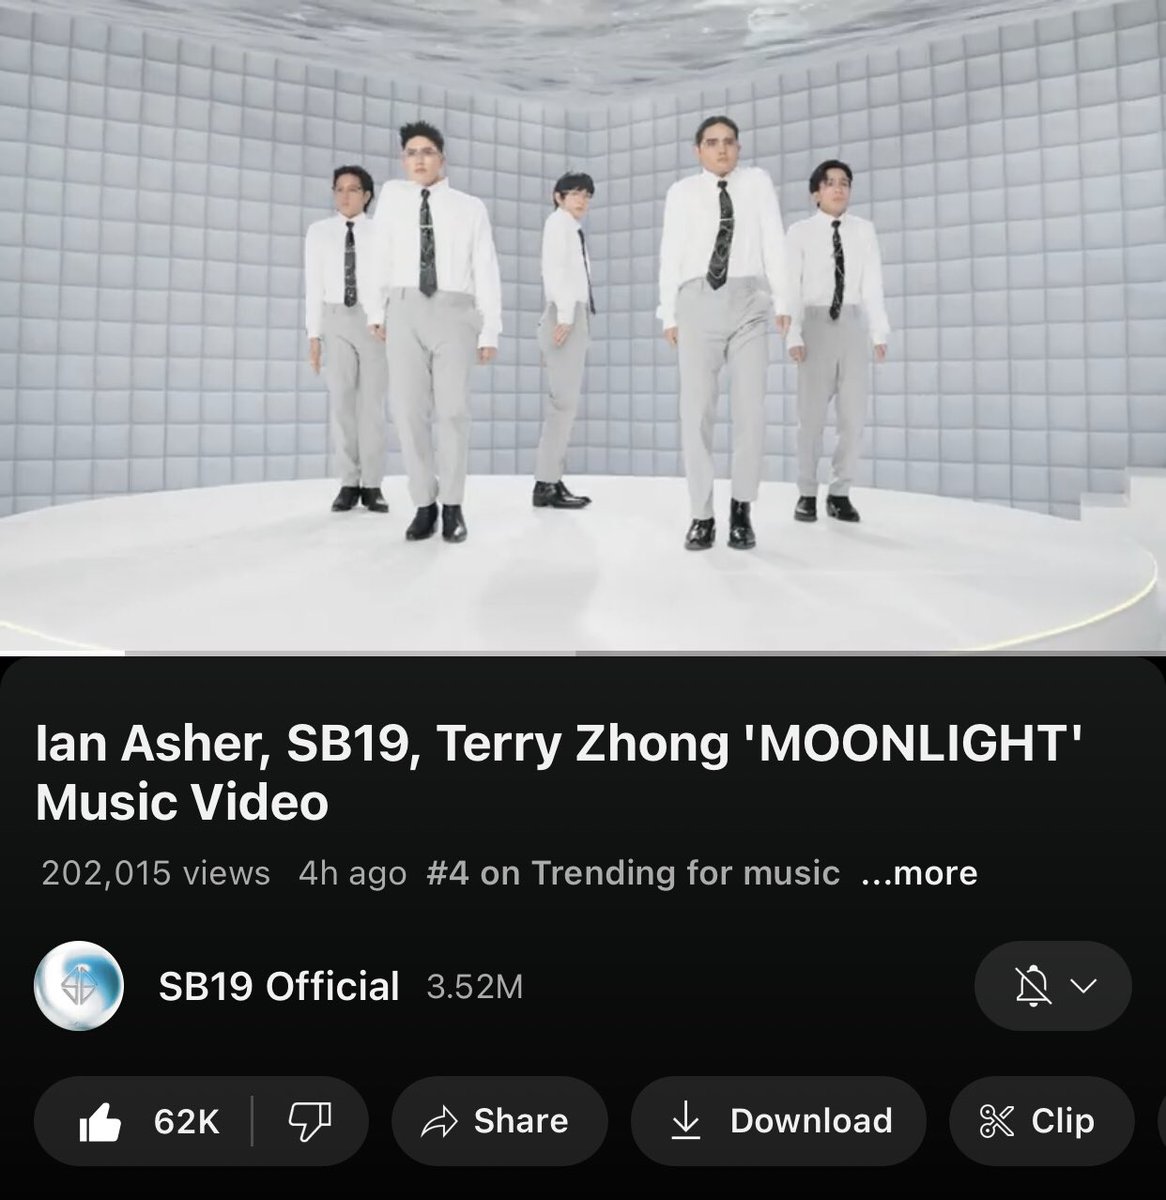 Quick update, MOONLIGHT just reached 200k views before 12 midnight PST and currently sitting #4 Trending in Music.

@SB19Official #SB19
#MOONLIGHTMVOutNow
#NewMusic